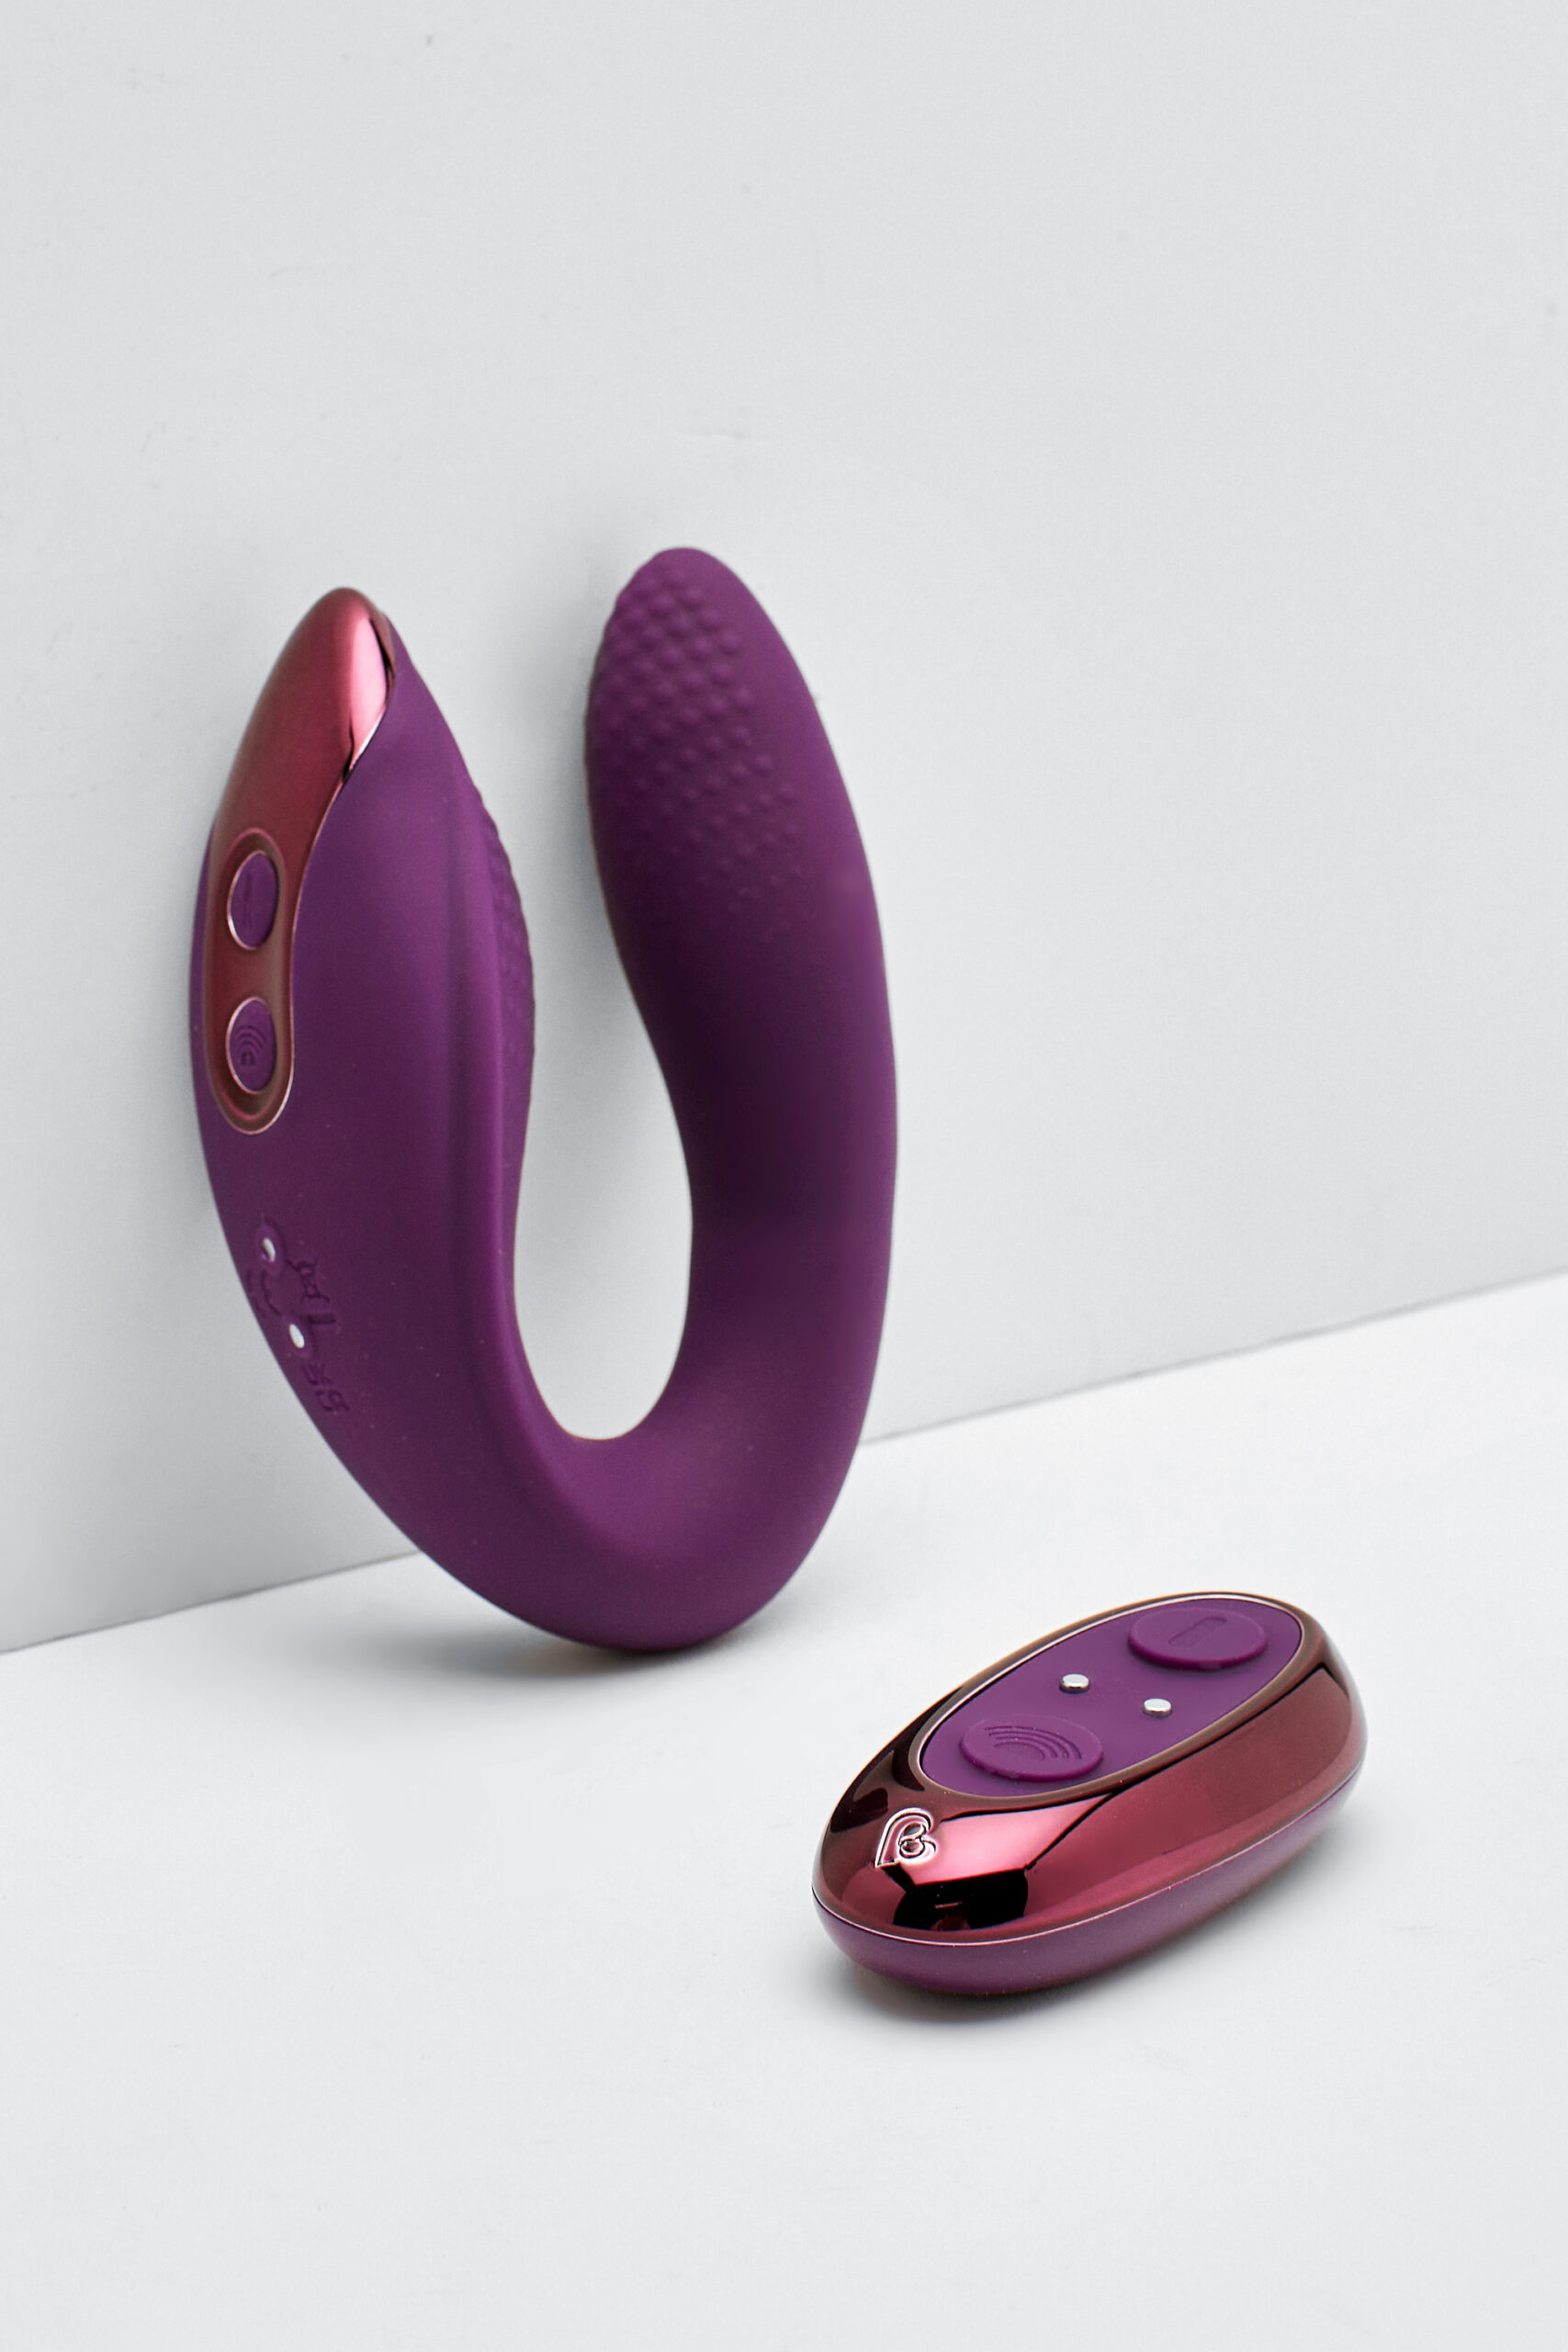 Remote Controlled C-Shaped Vibrator